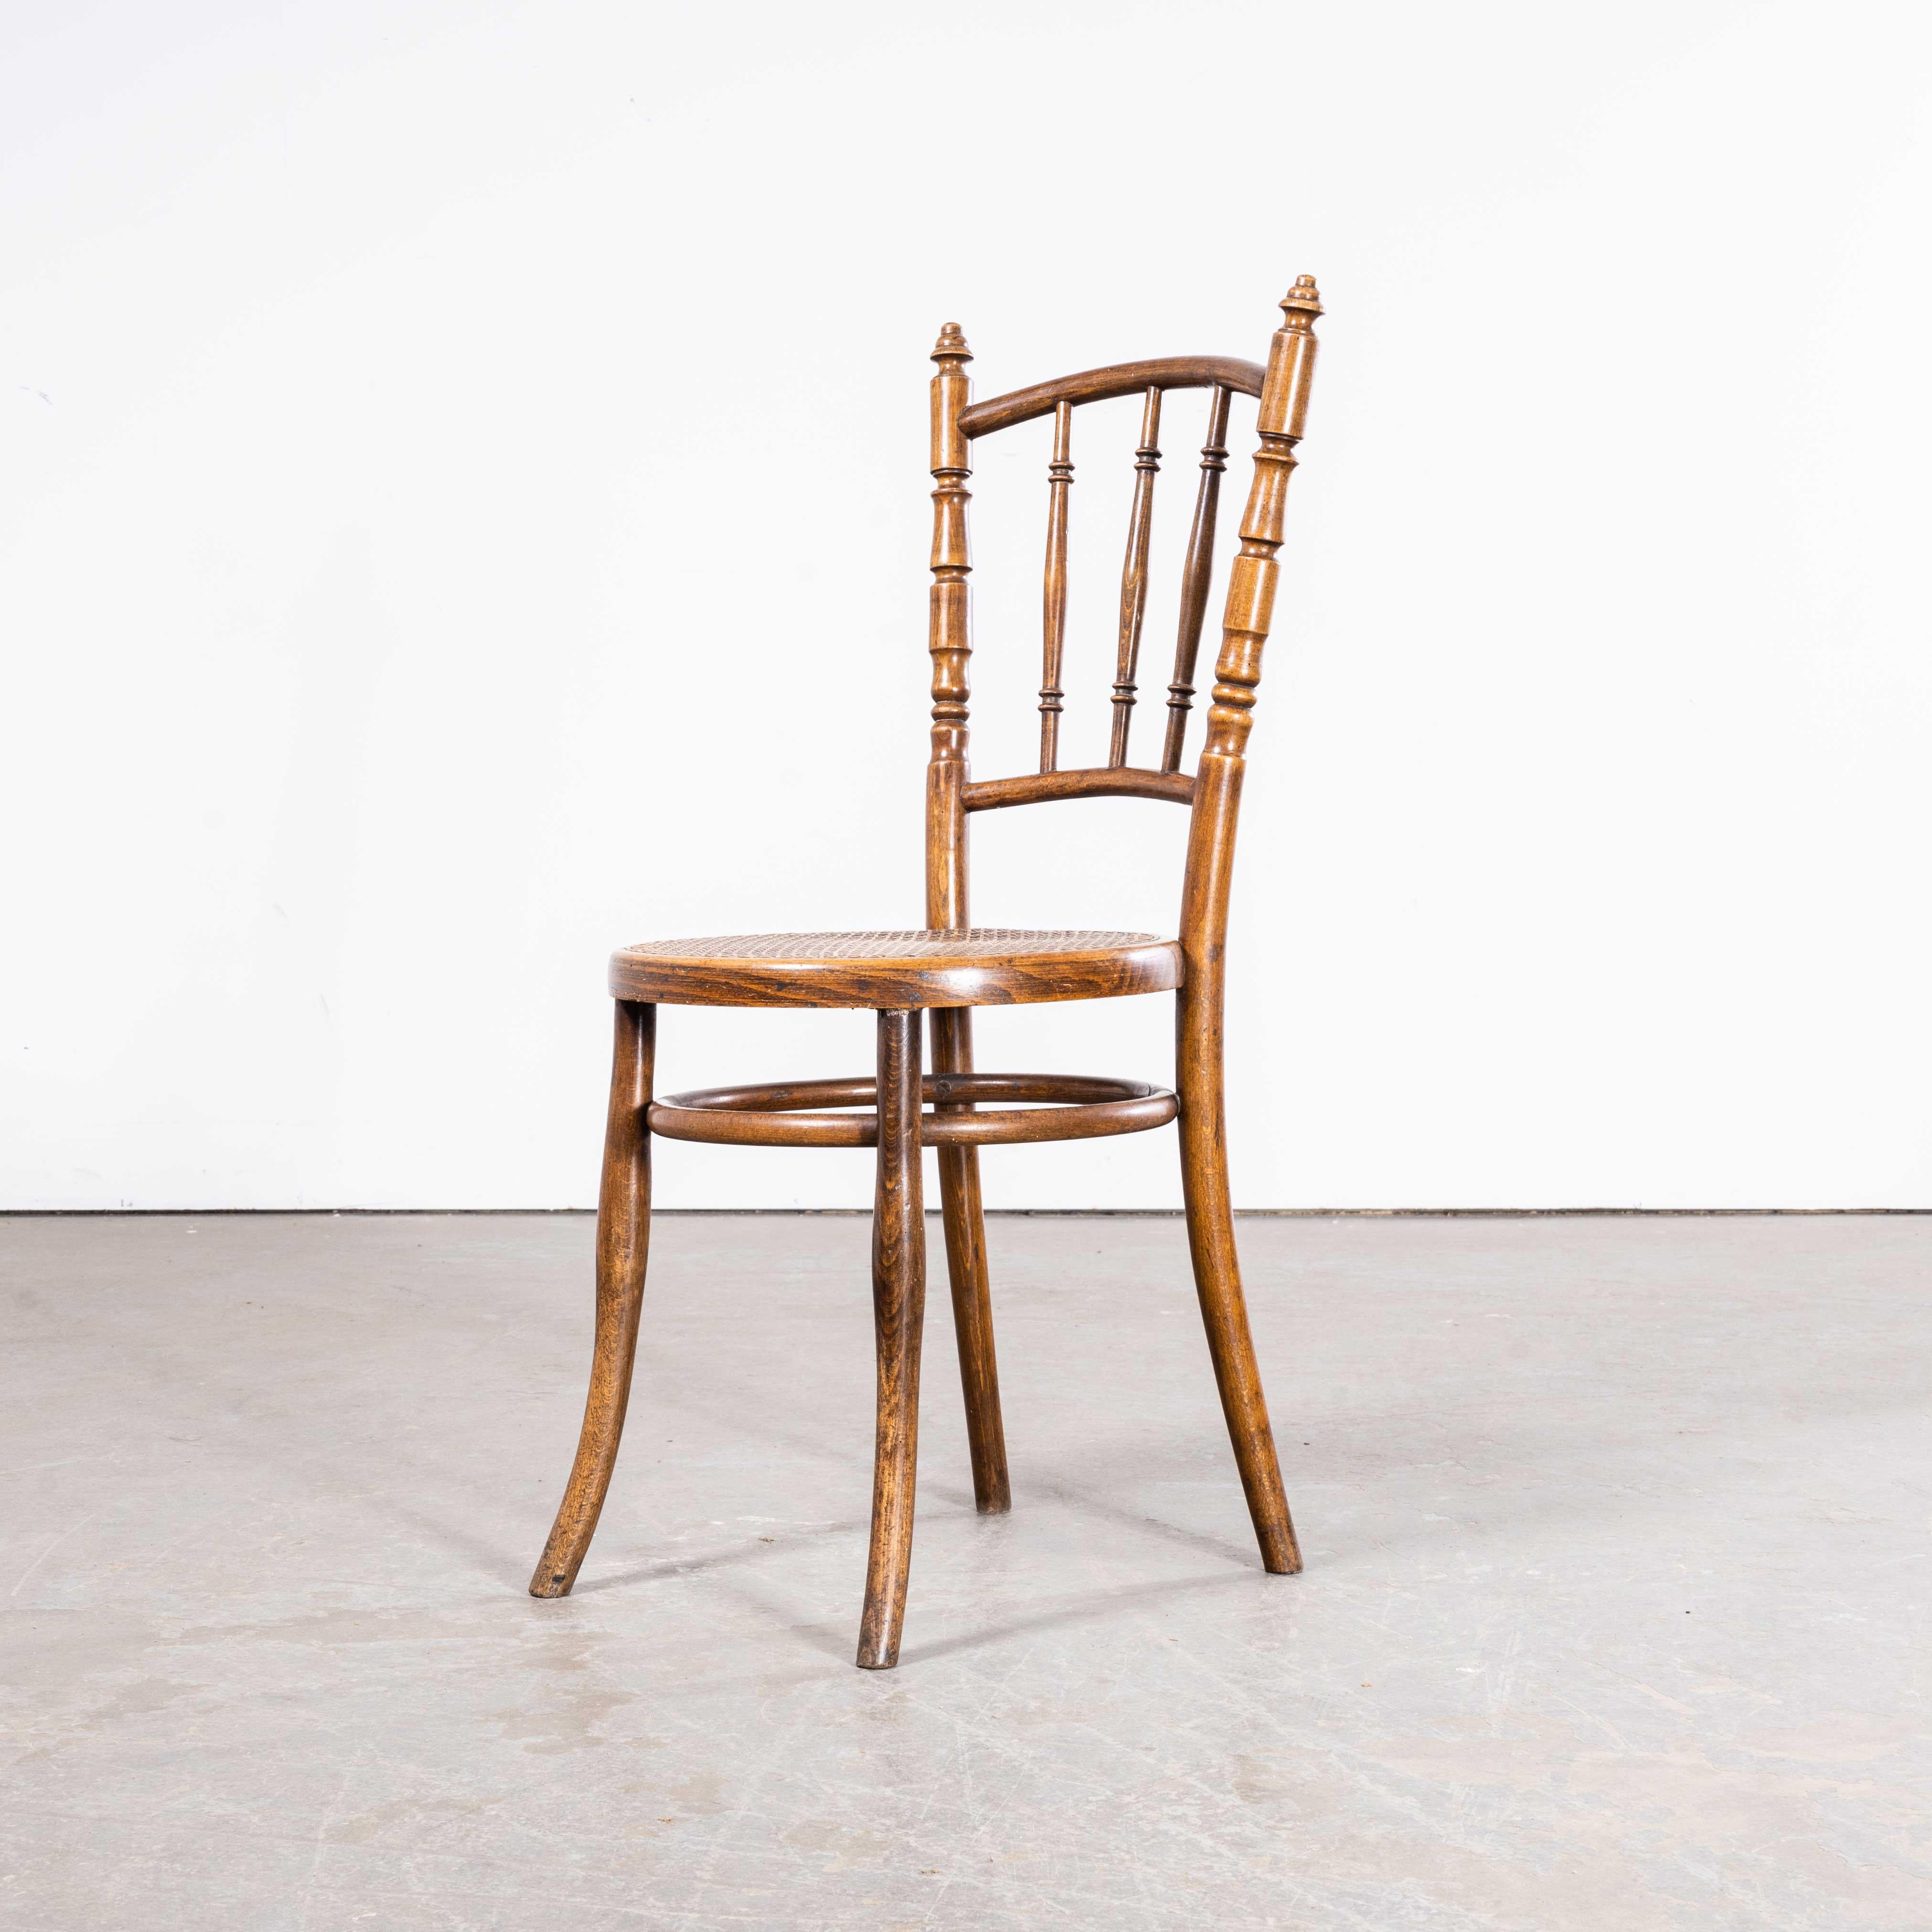 European 1950s Cane Seated Hofmann Bentwood Dining Chairs – Set Of Six.